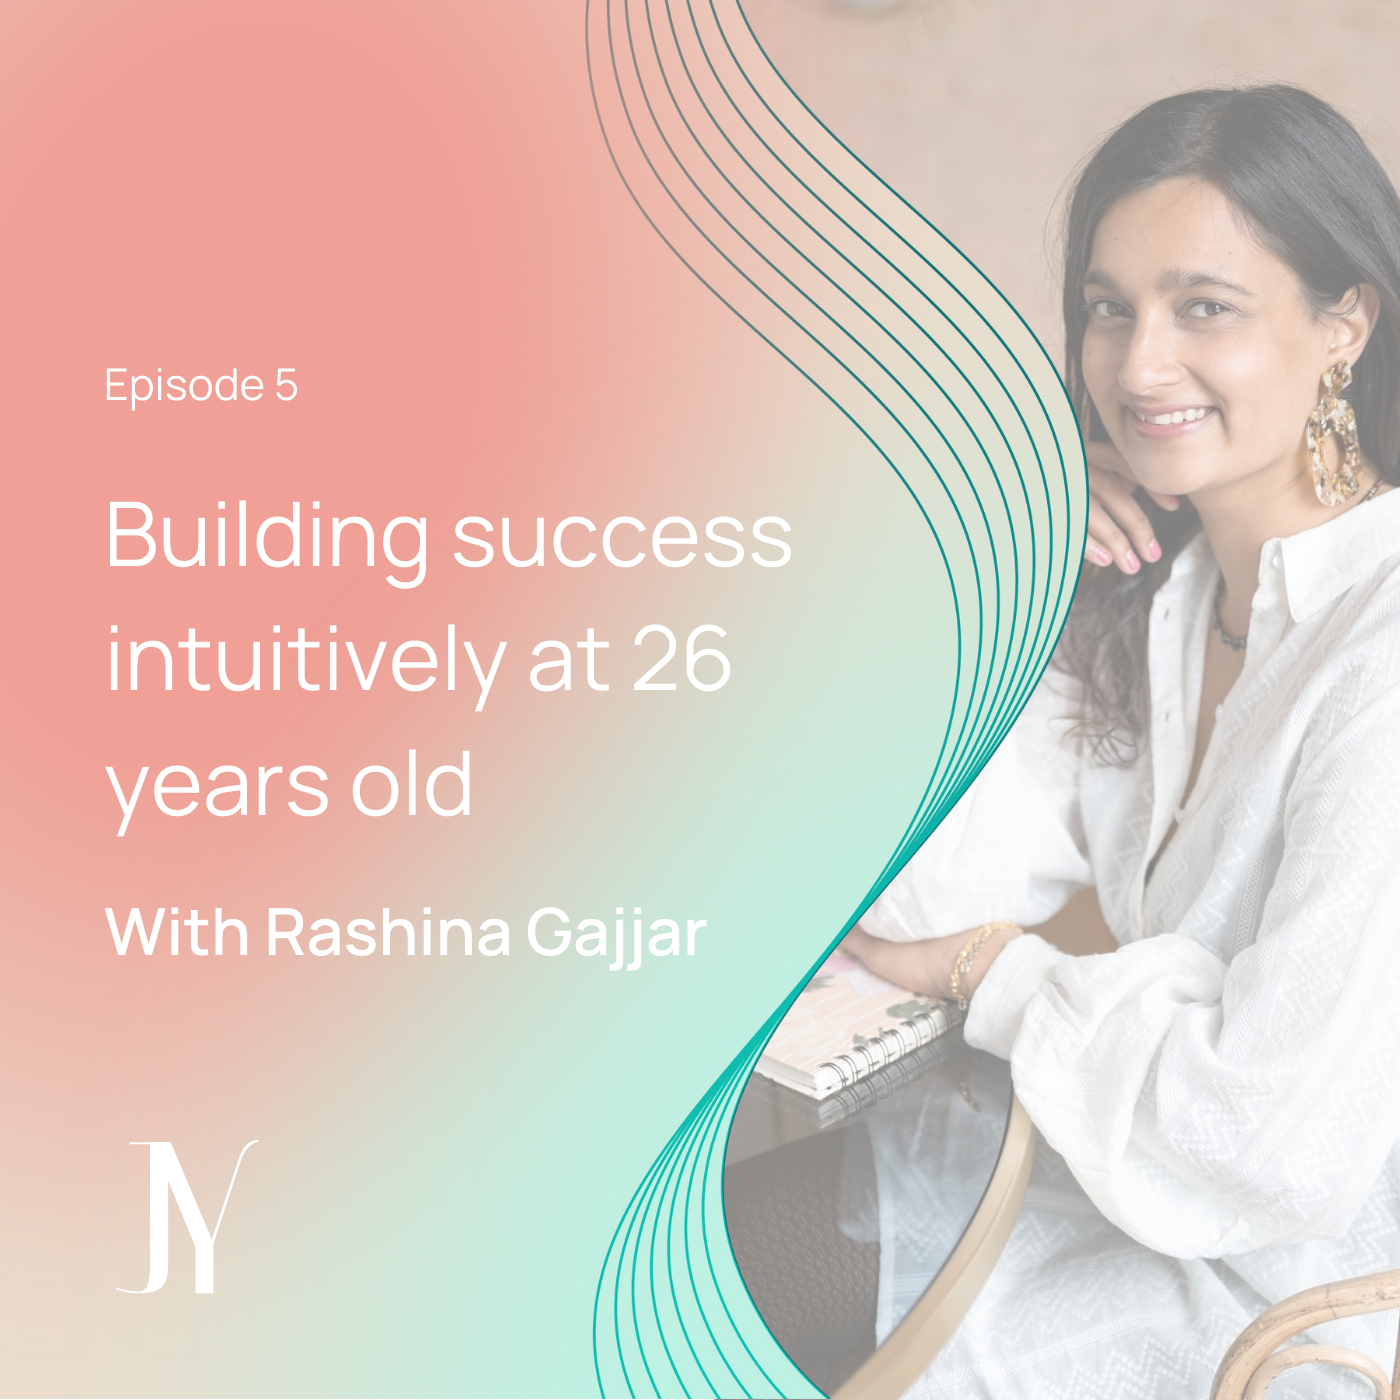 Building success intuitively at 26 years old_Rashina Gajjar_Intuitive Business